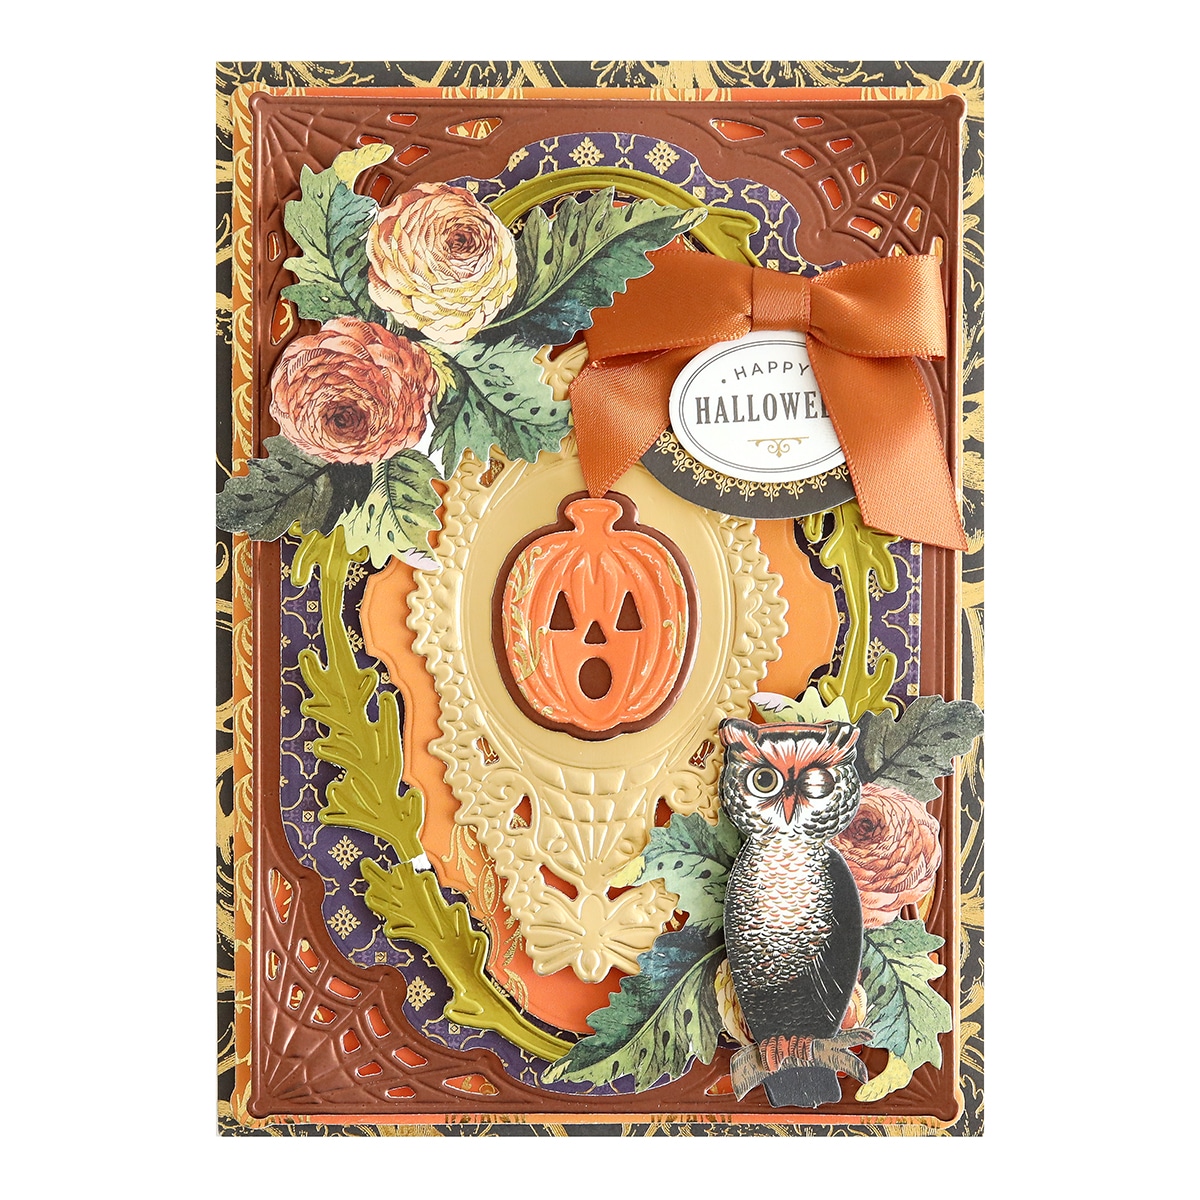 A halloween card with owls and flowers.